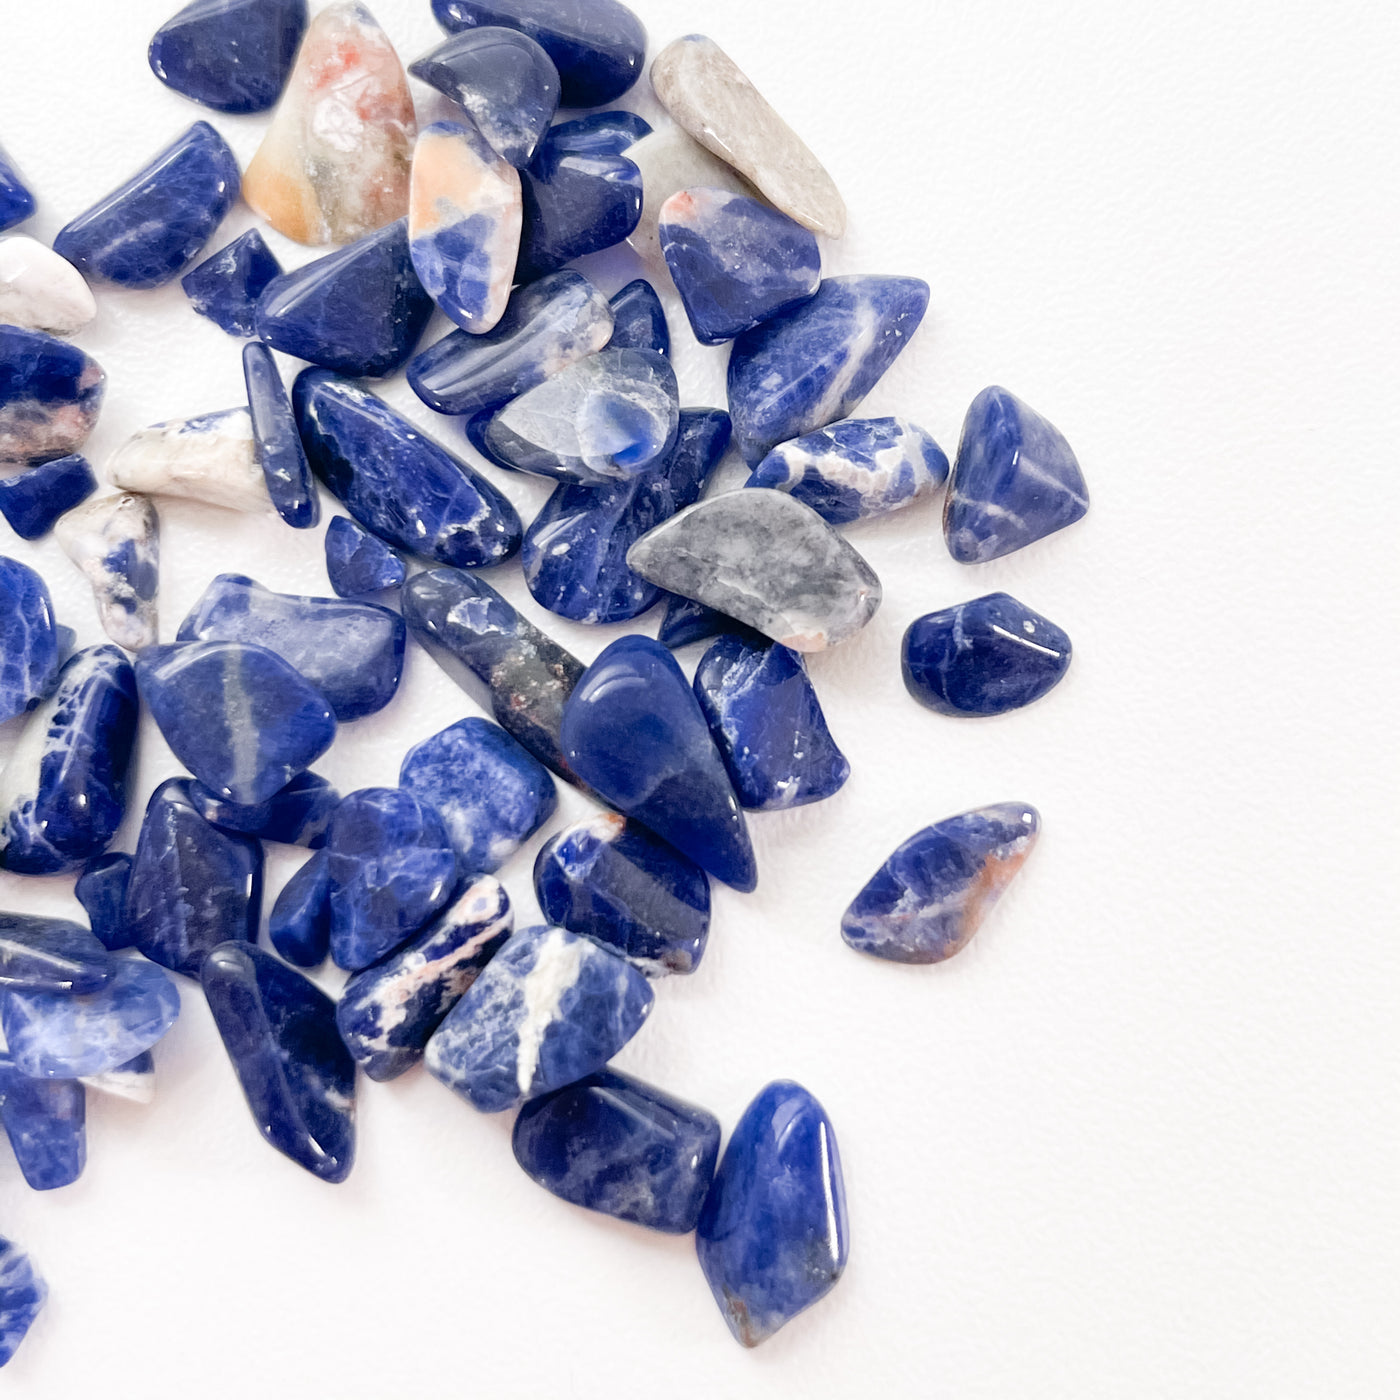 Scoop of Tumbled Sodalite Chips